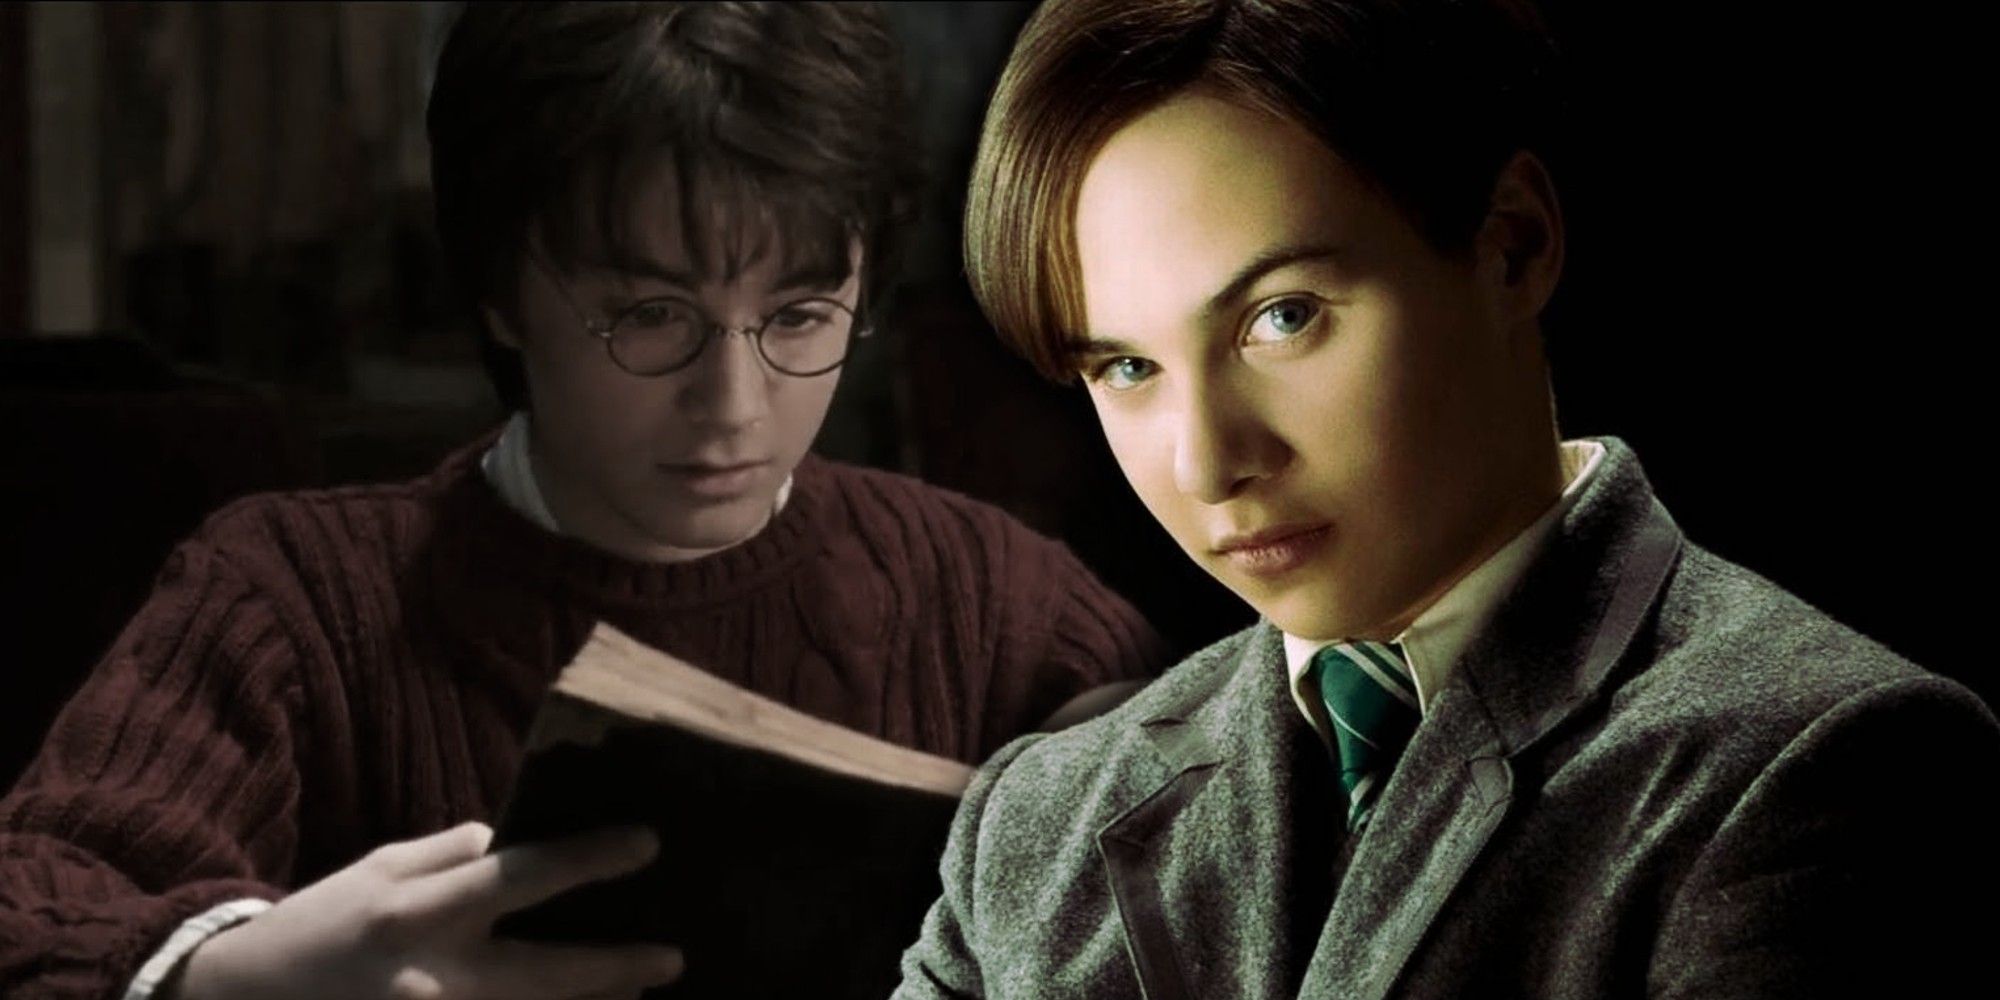 harry potter and the chamber of secrets tom riddle diary